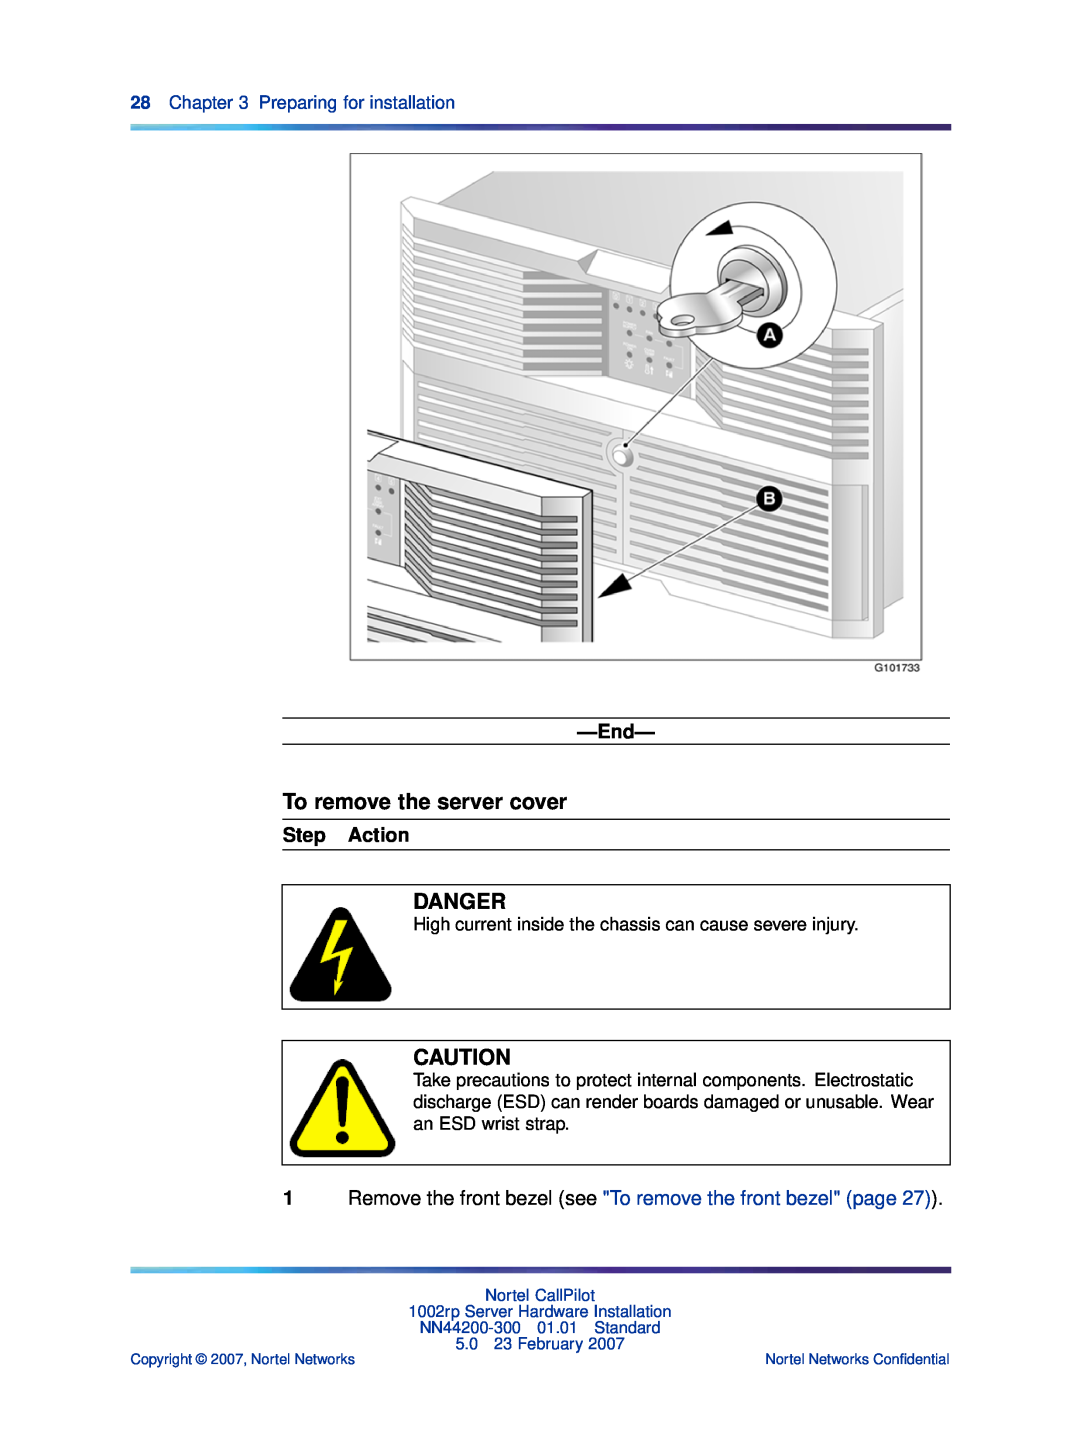 Nortel Networks manual To remove the server cover, Danger, Step Action, NN44200-300 01.01 Standard 5.0 23 February 